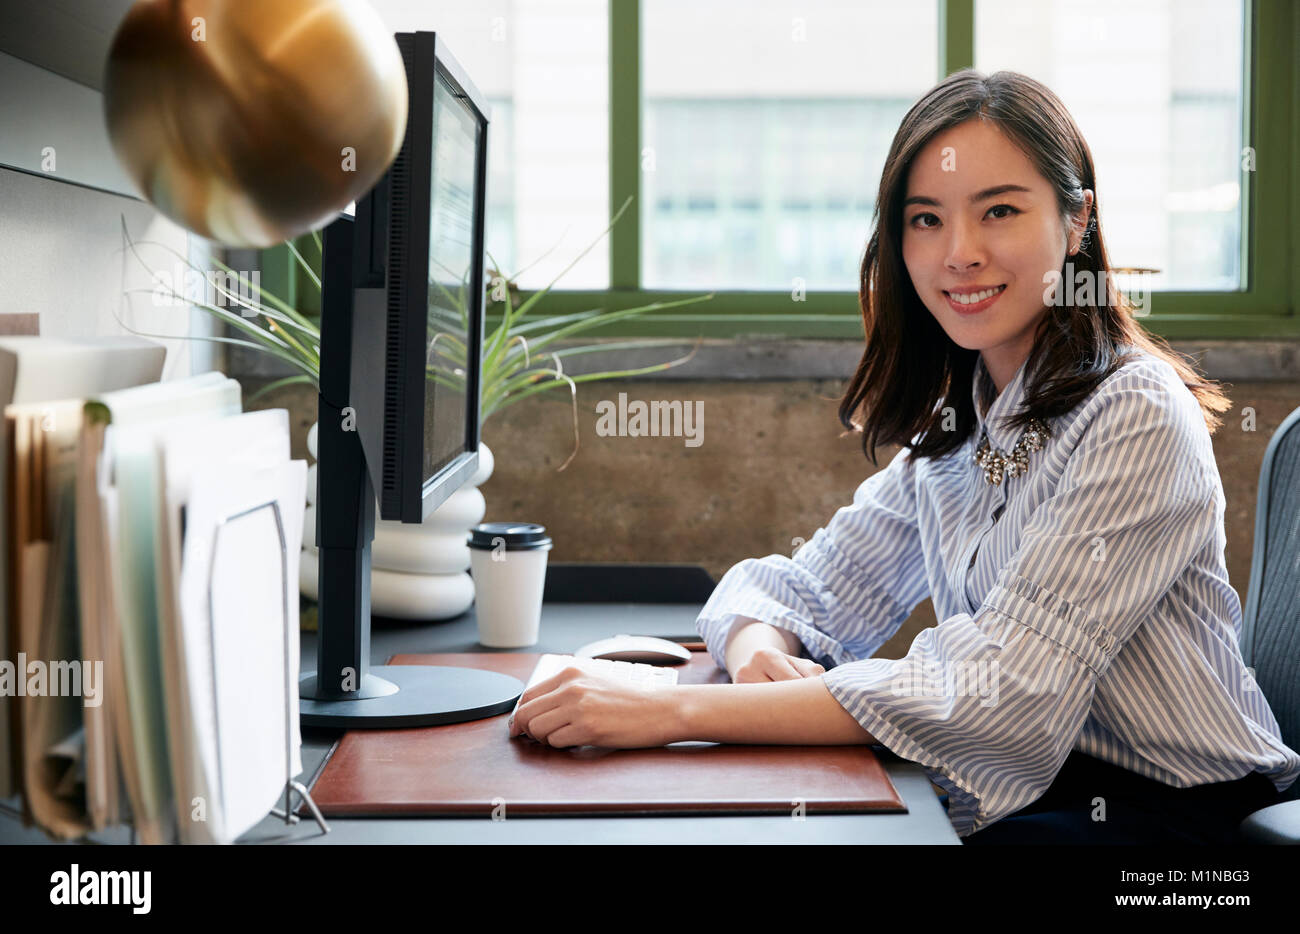 Chinese woman at a computer in an office smiling to camera Stock Photo